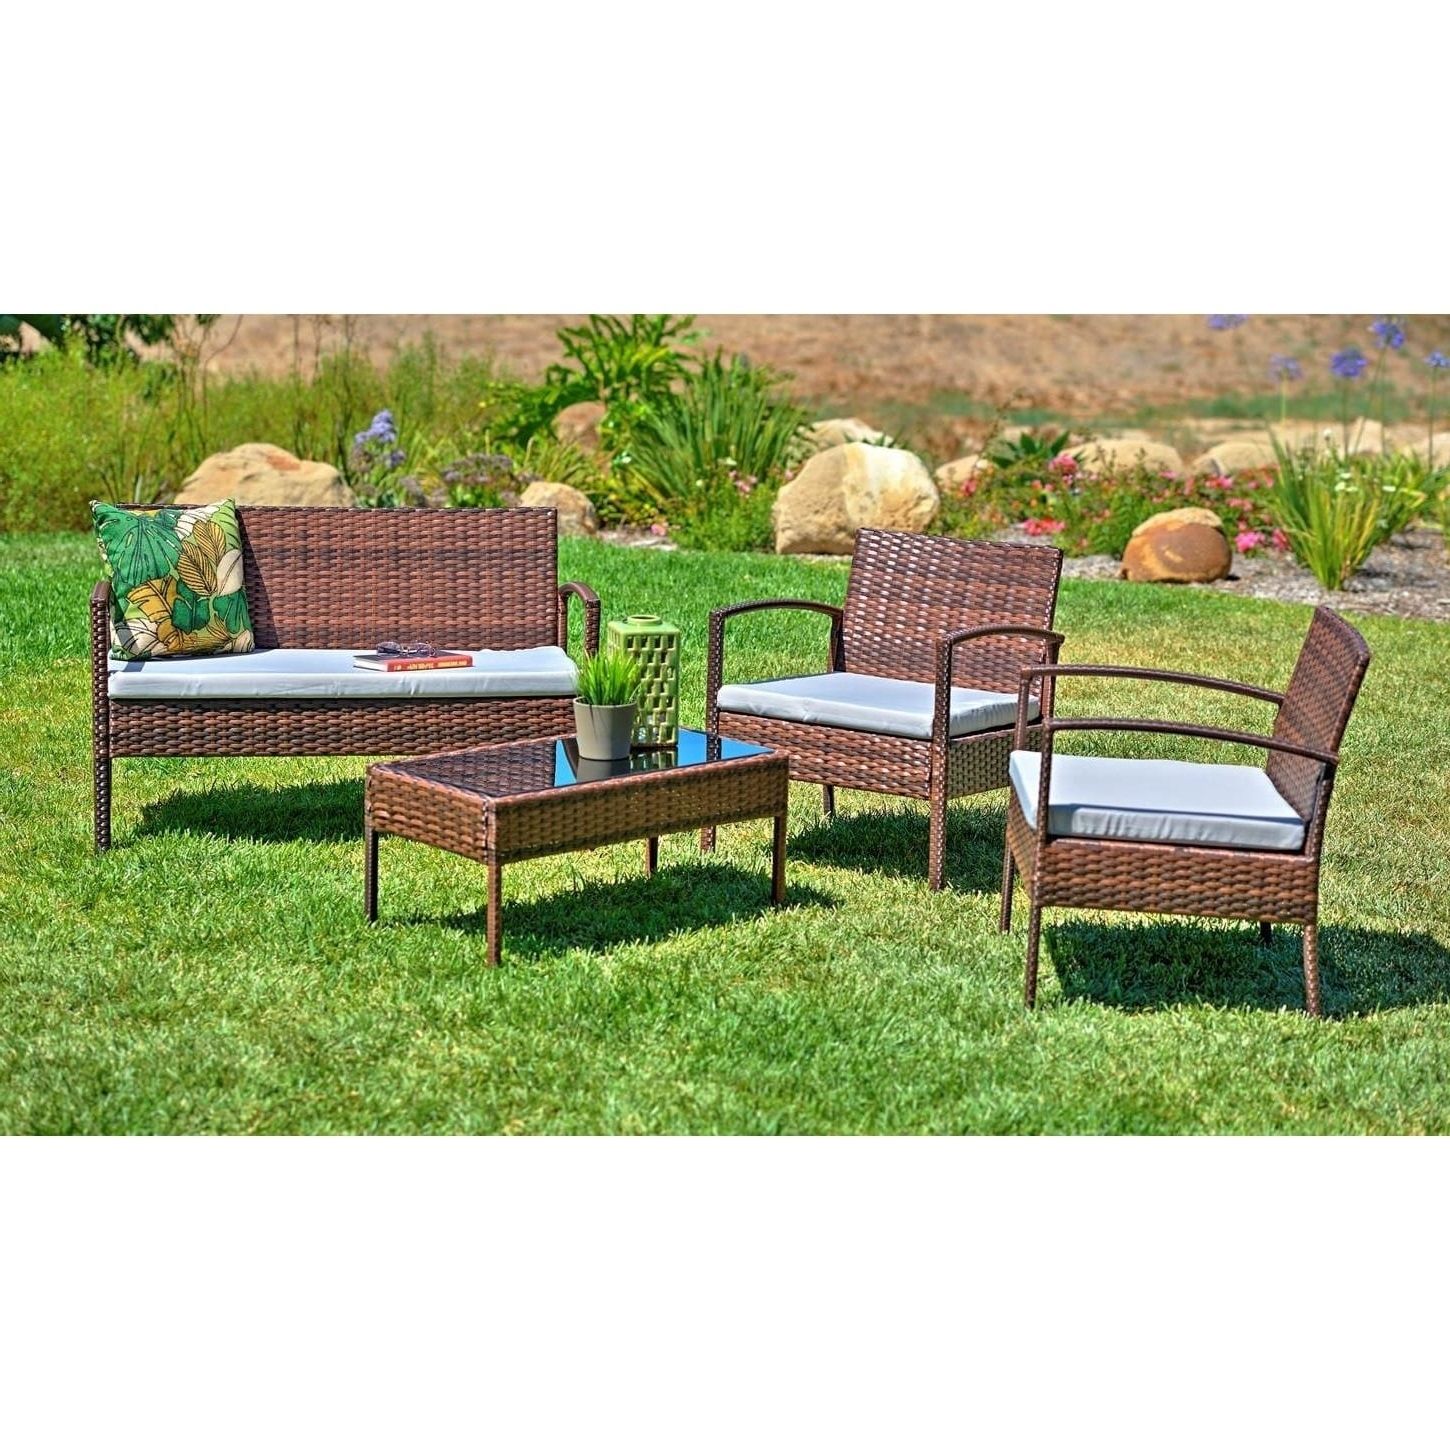 Latest Grey Patio Conversation Sets With Regard To Shop Teaset 4 Piece Patio Conversation Set With Grey Cushions – Free (View 12 of 20)